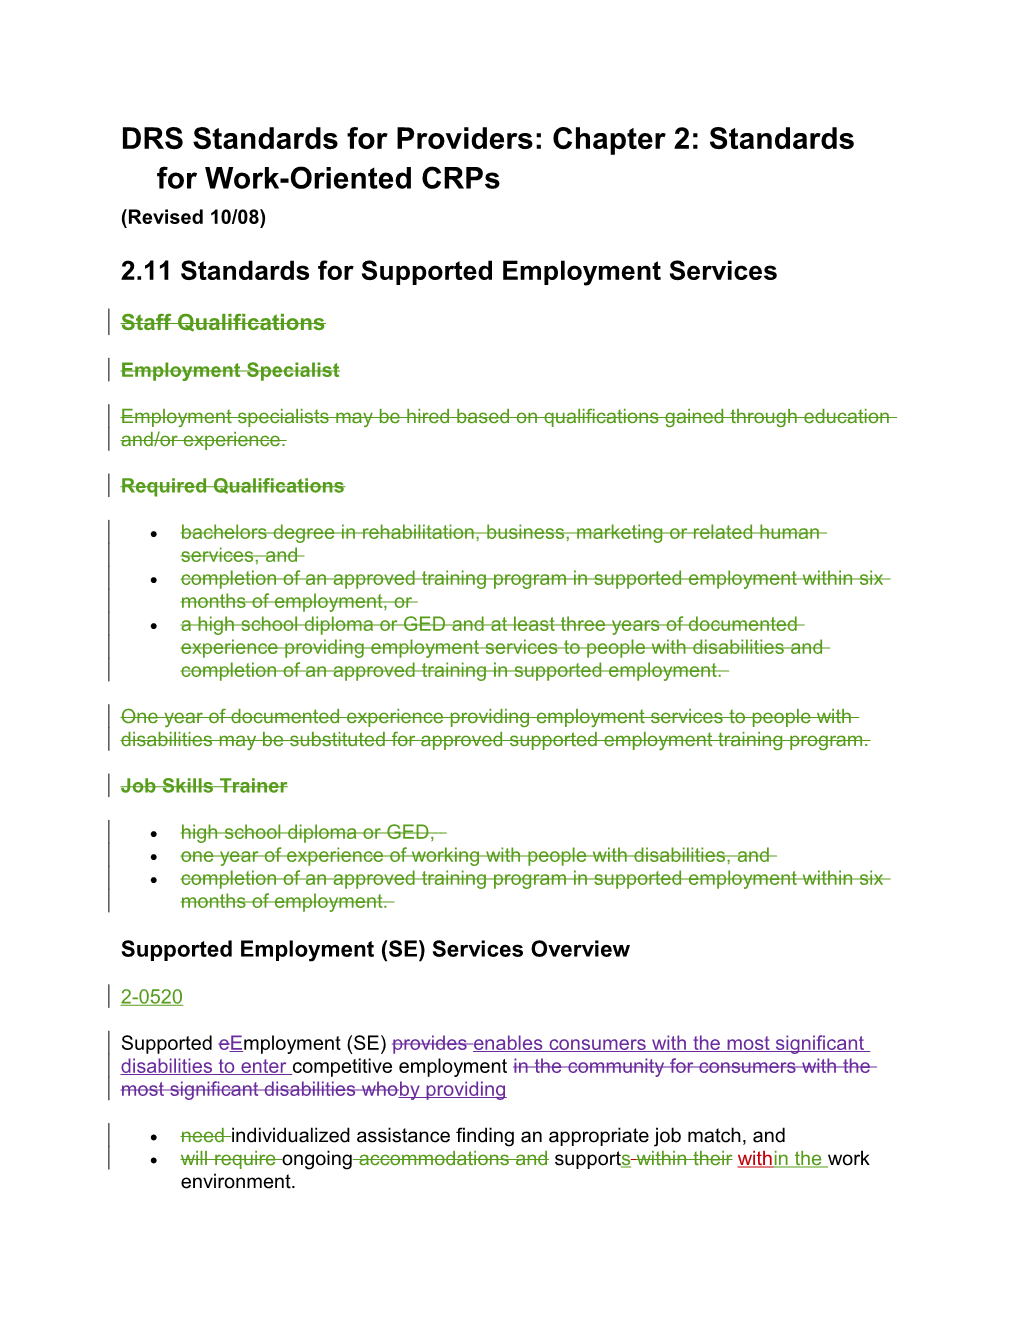 DRS Standards for Providers: Chapter 2: Standards for Work-Oriented Crps